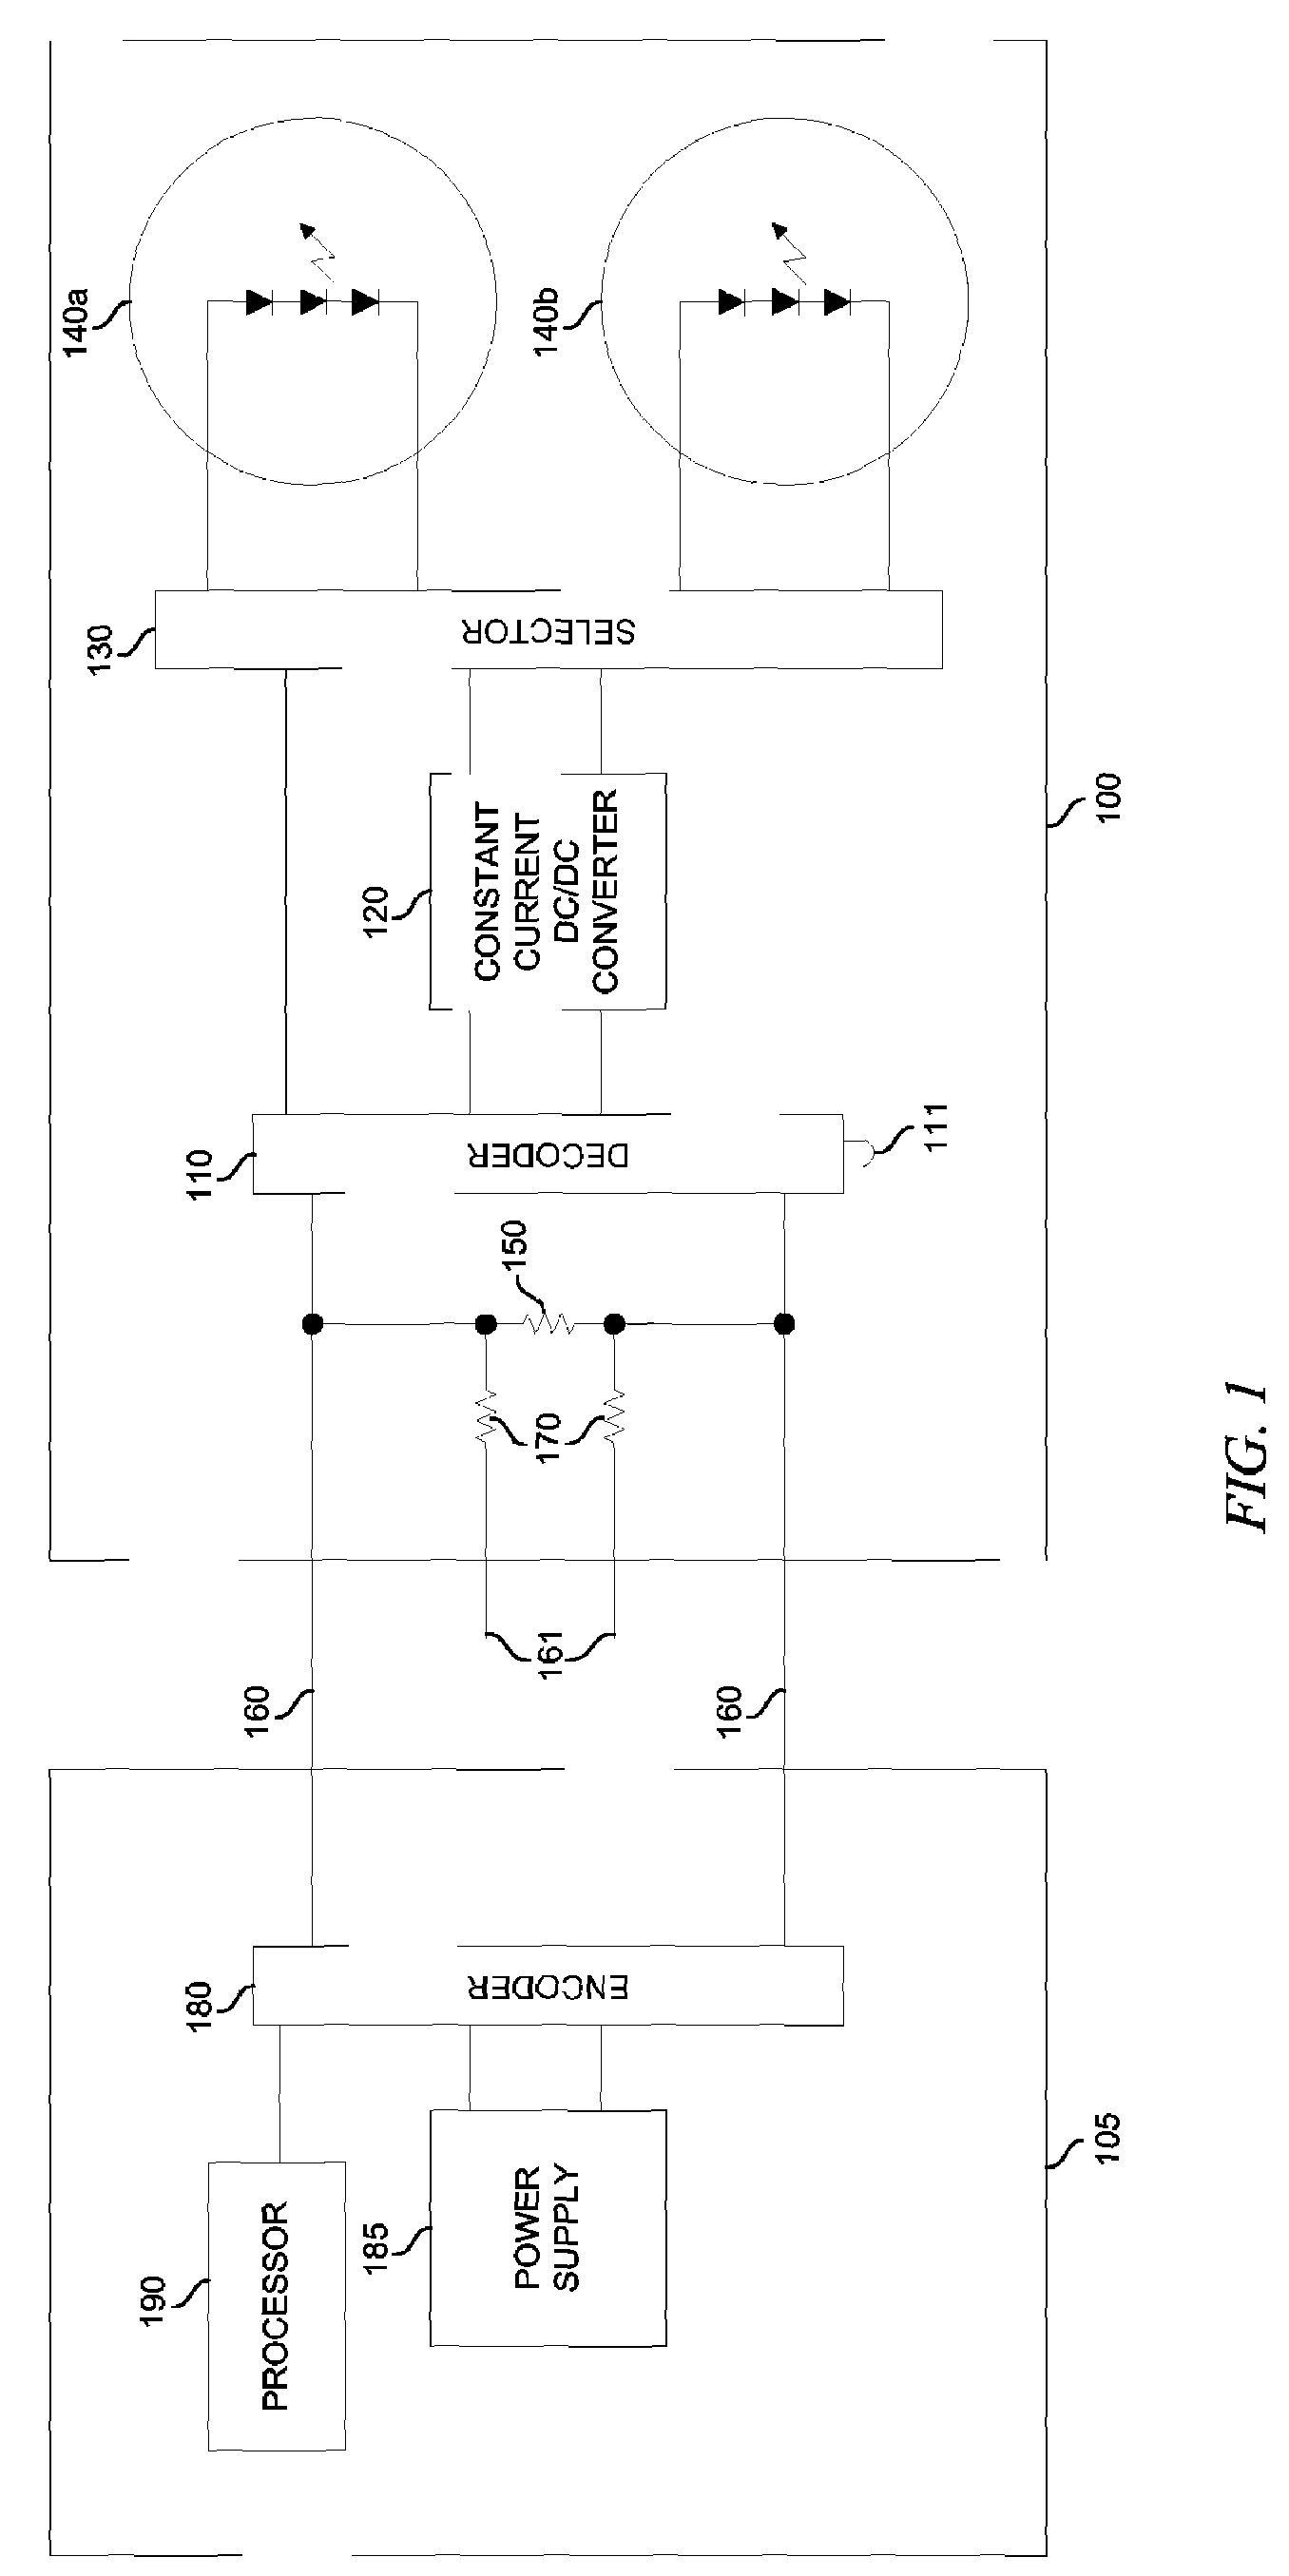 System and method for multiplexing traffic signals and bridge collapse detection